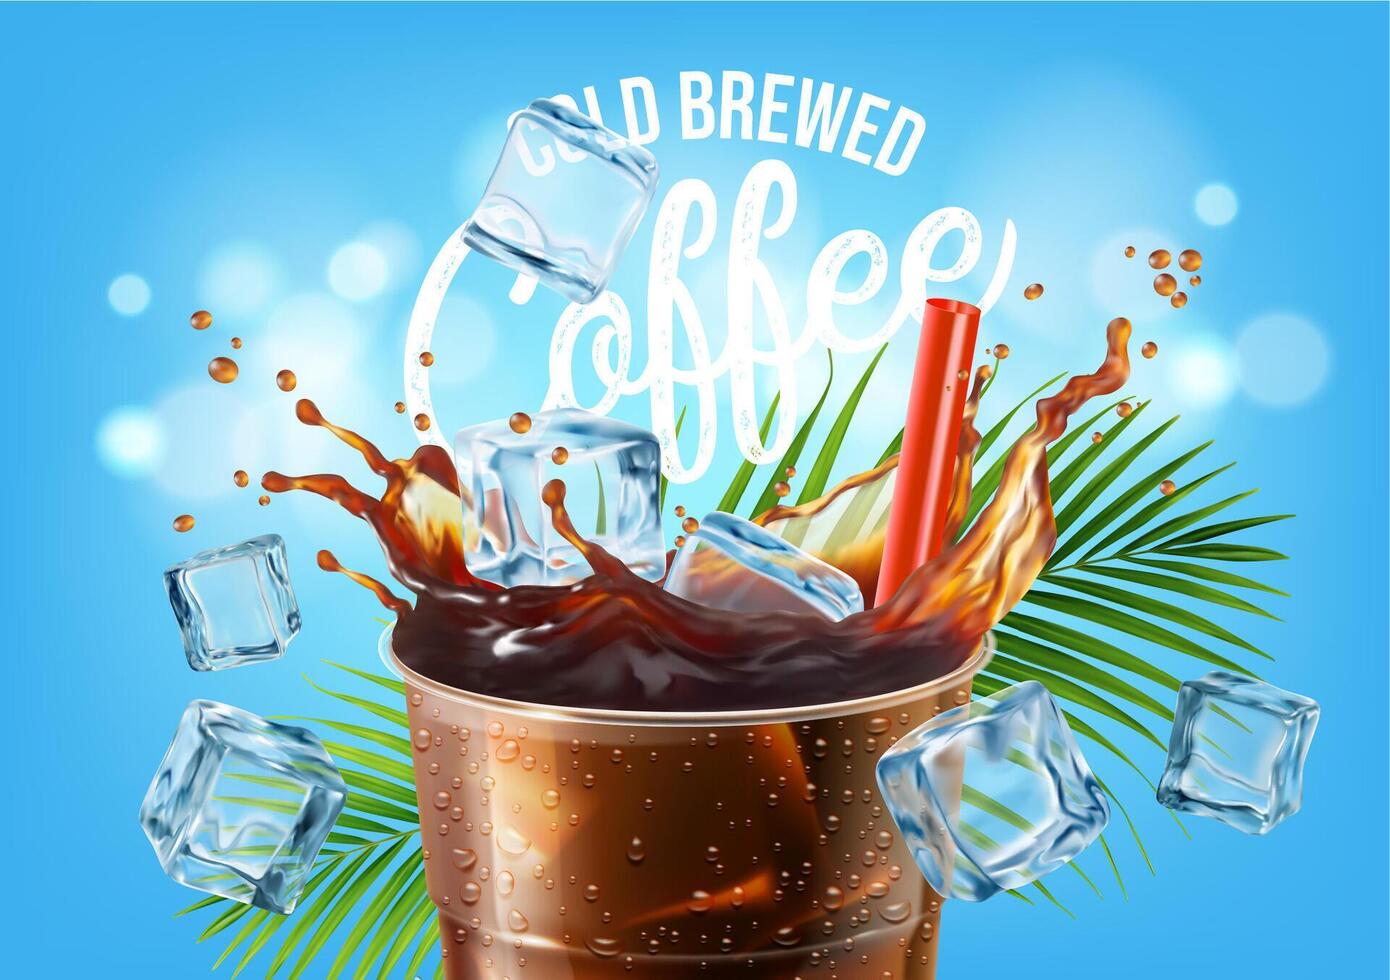 Cold coffee drink with ice cubes and splash, beach vector